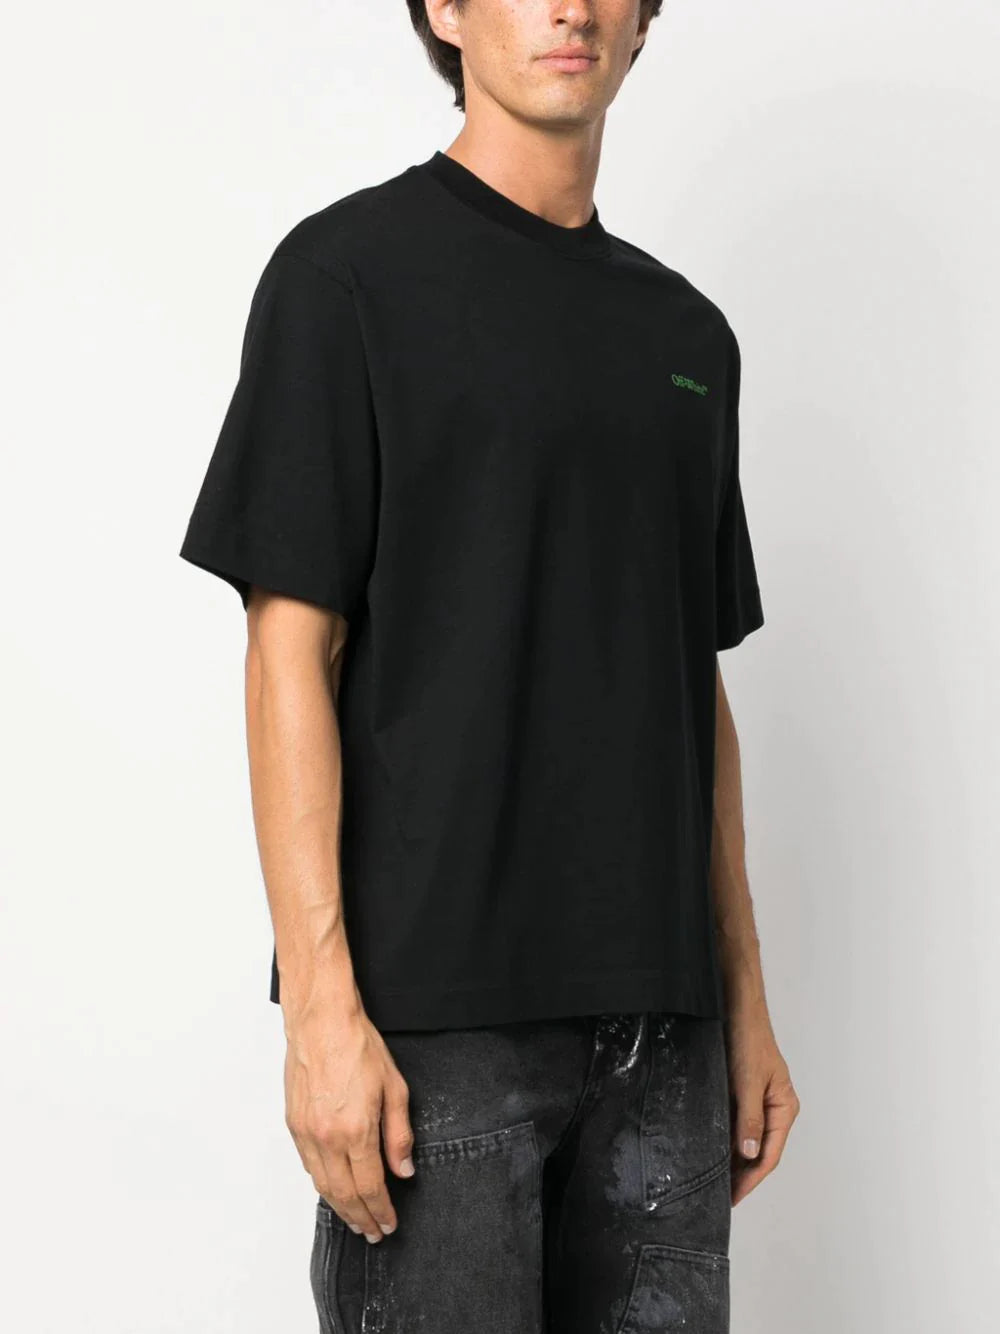 Off-White Moon Arrow Printed T-Shirt in Black